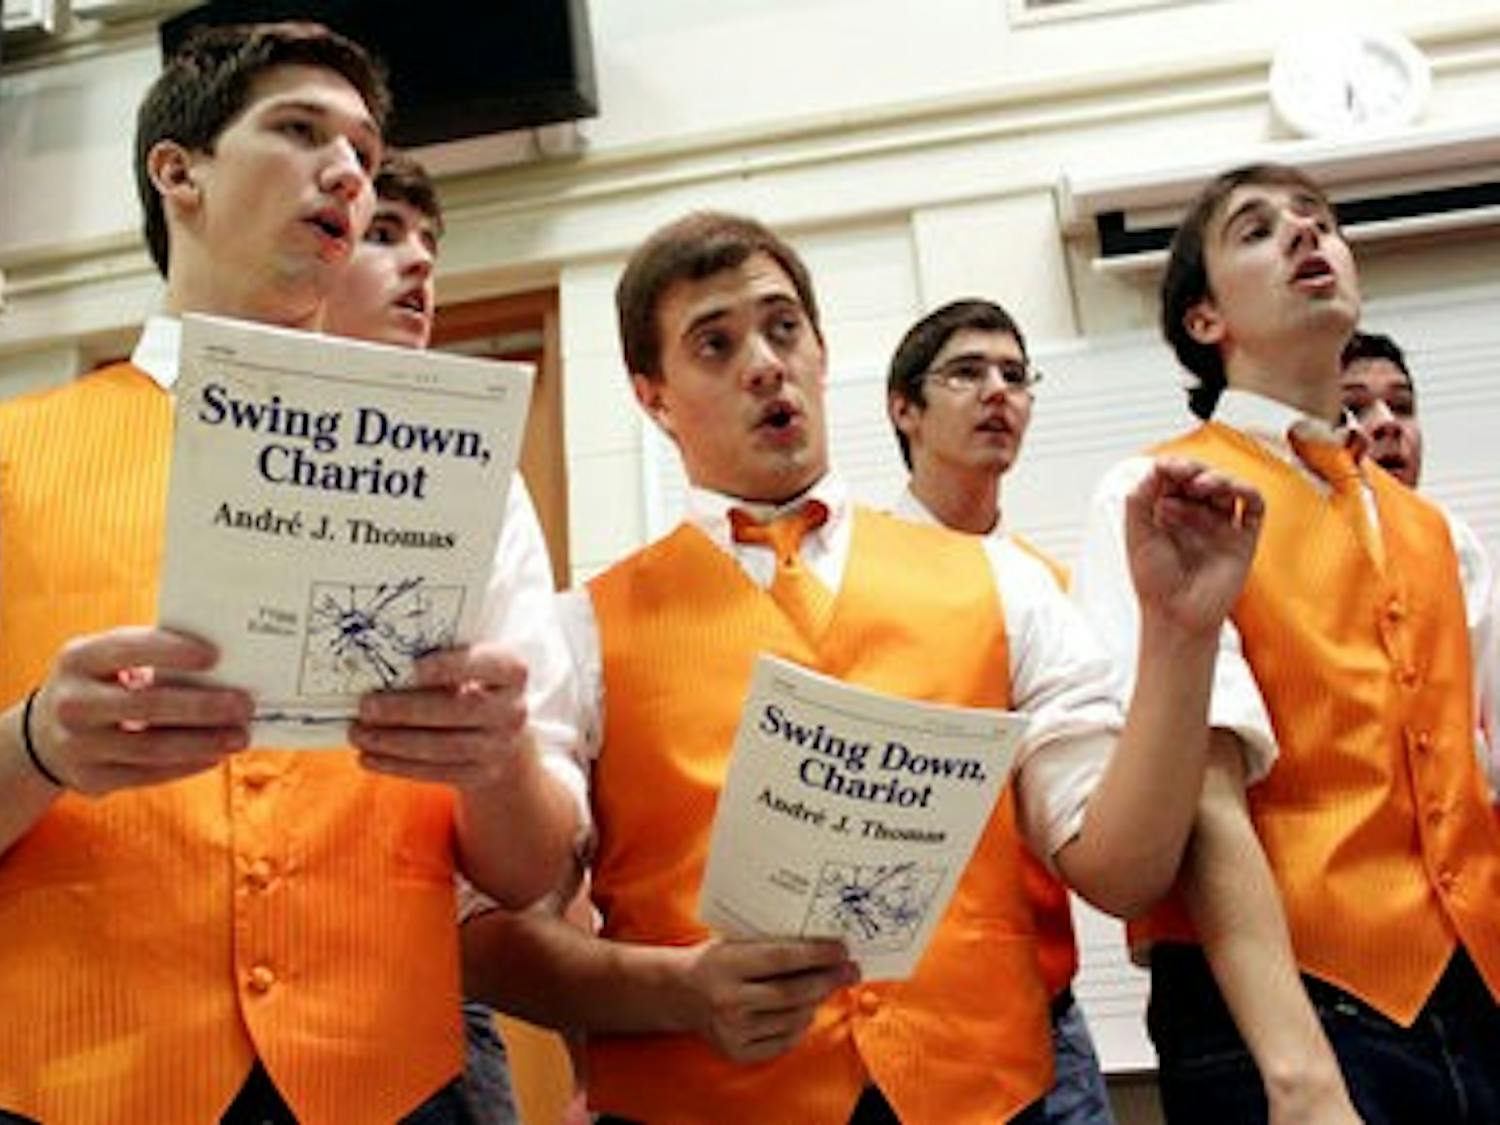 AU Cappella practices "Swing Down, Chariot" for the upcoming show. (Emily Adams / Photo Editor)